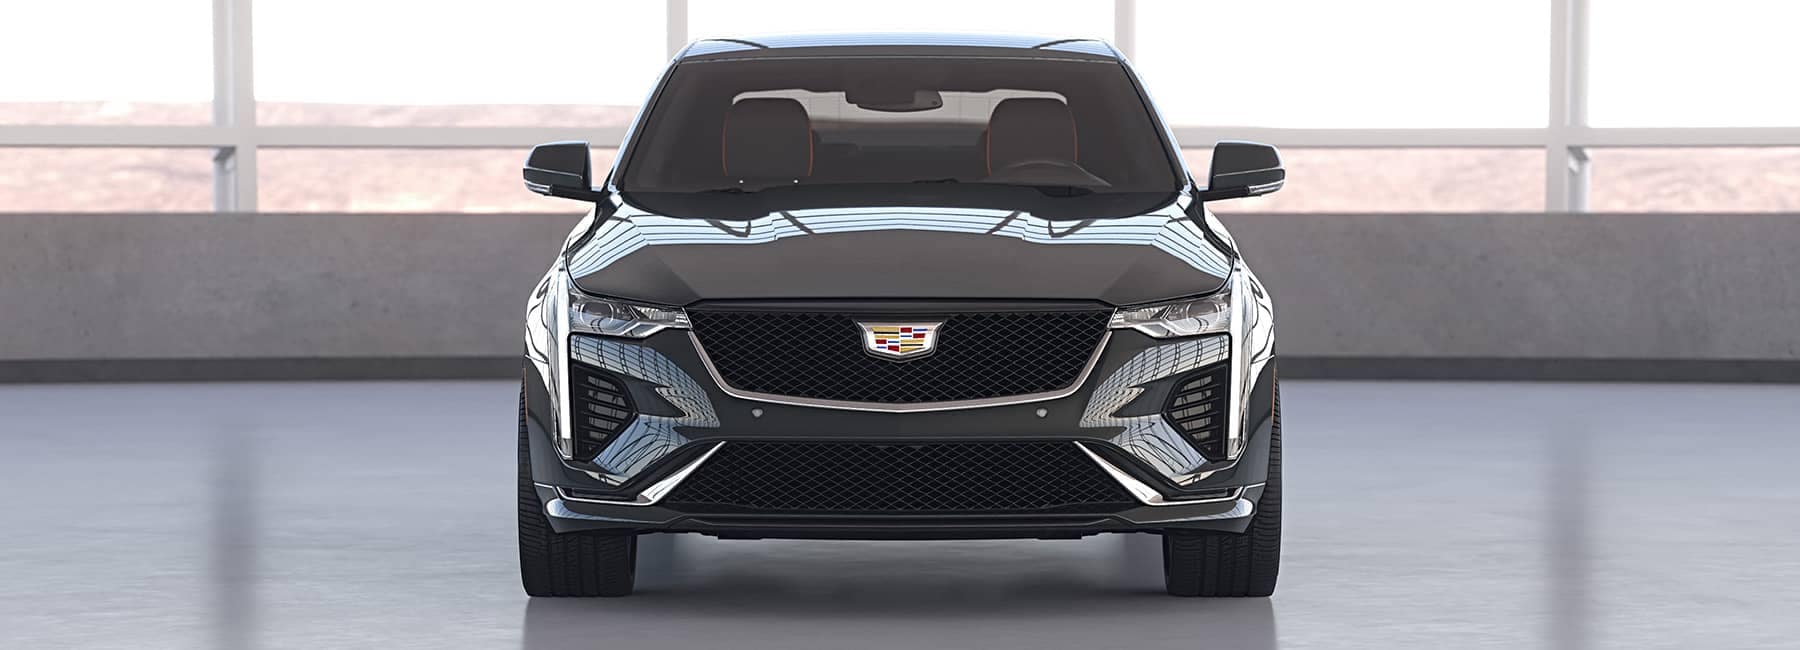 2022 Cadillac CT4 Sport in Shadow Metallic front view_mobile